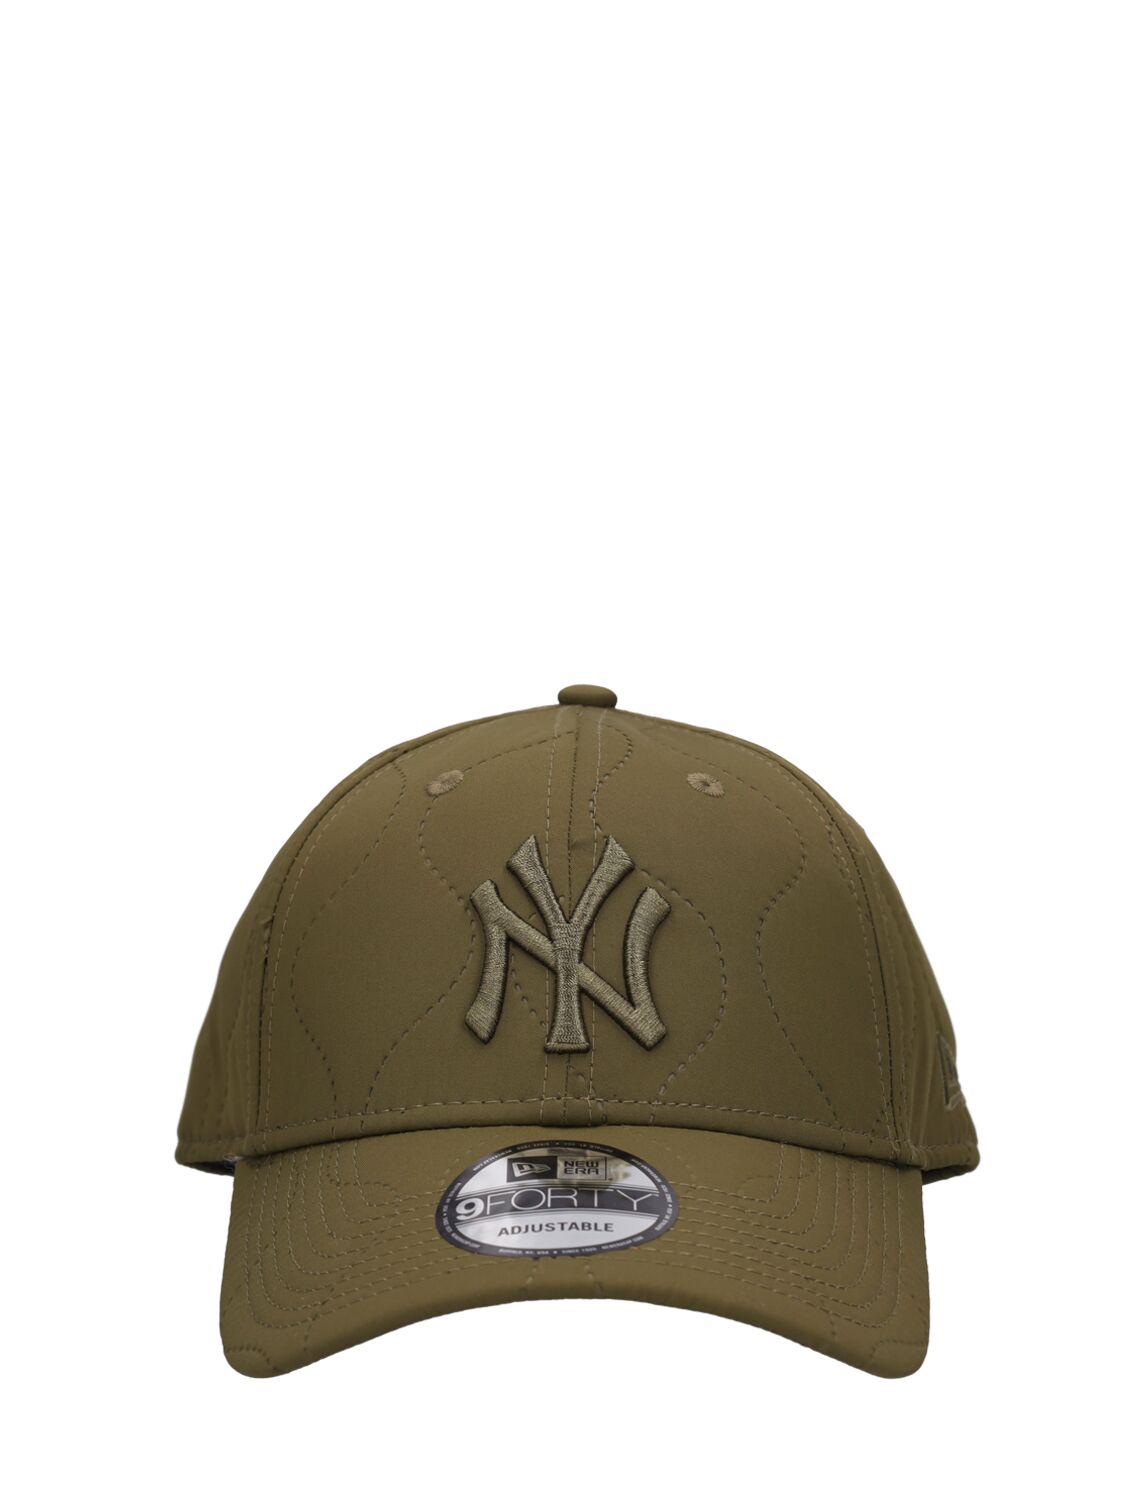 Mlb Quilted 9forty New York Yankees Cap